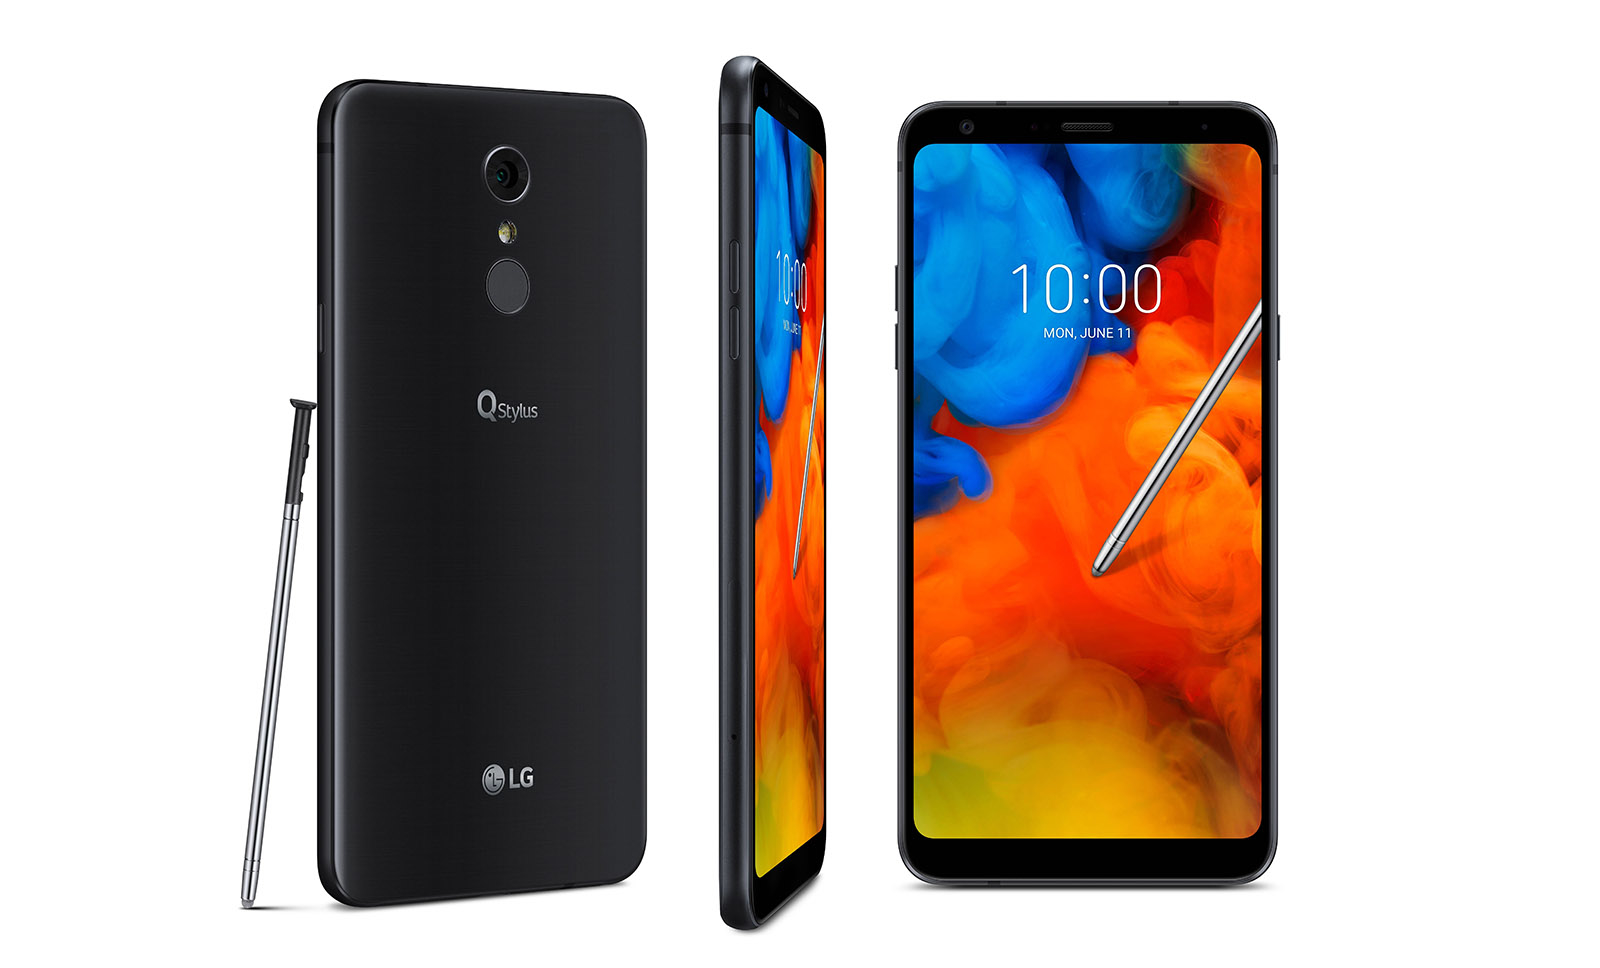 LG Q Stylus+ goes official in India, comes with 4GB RAM and 6.2-inch